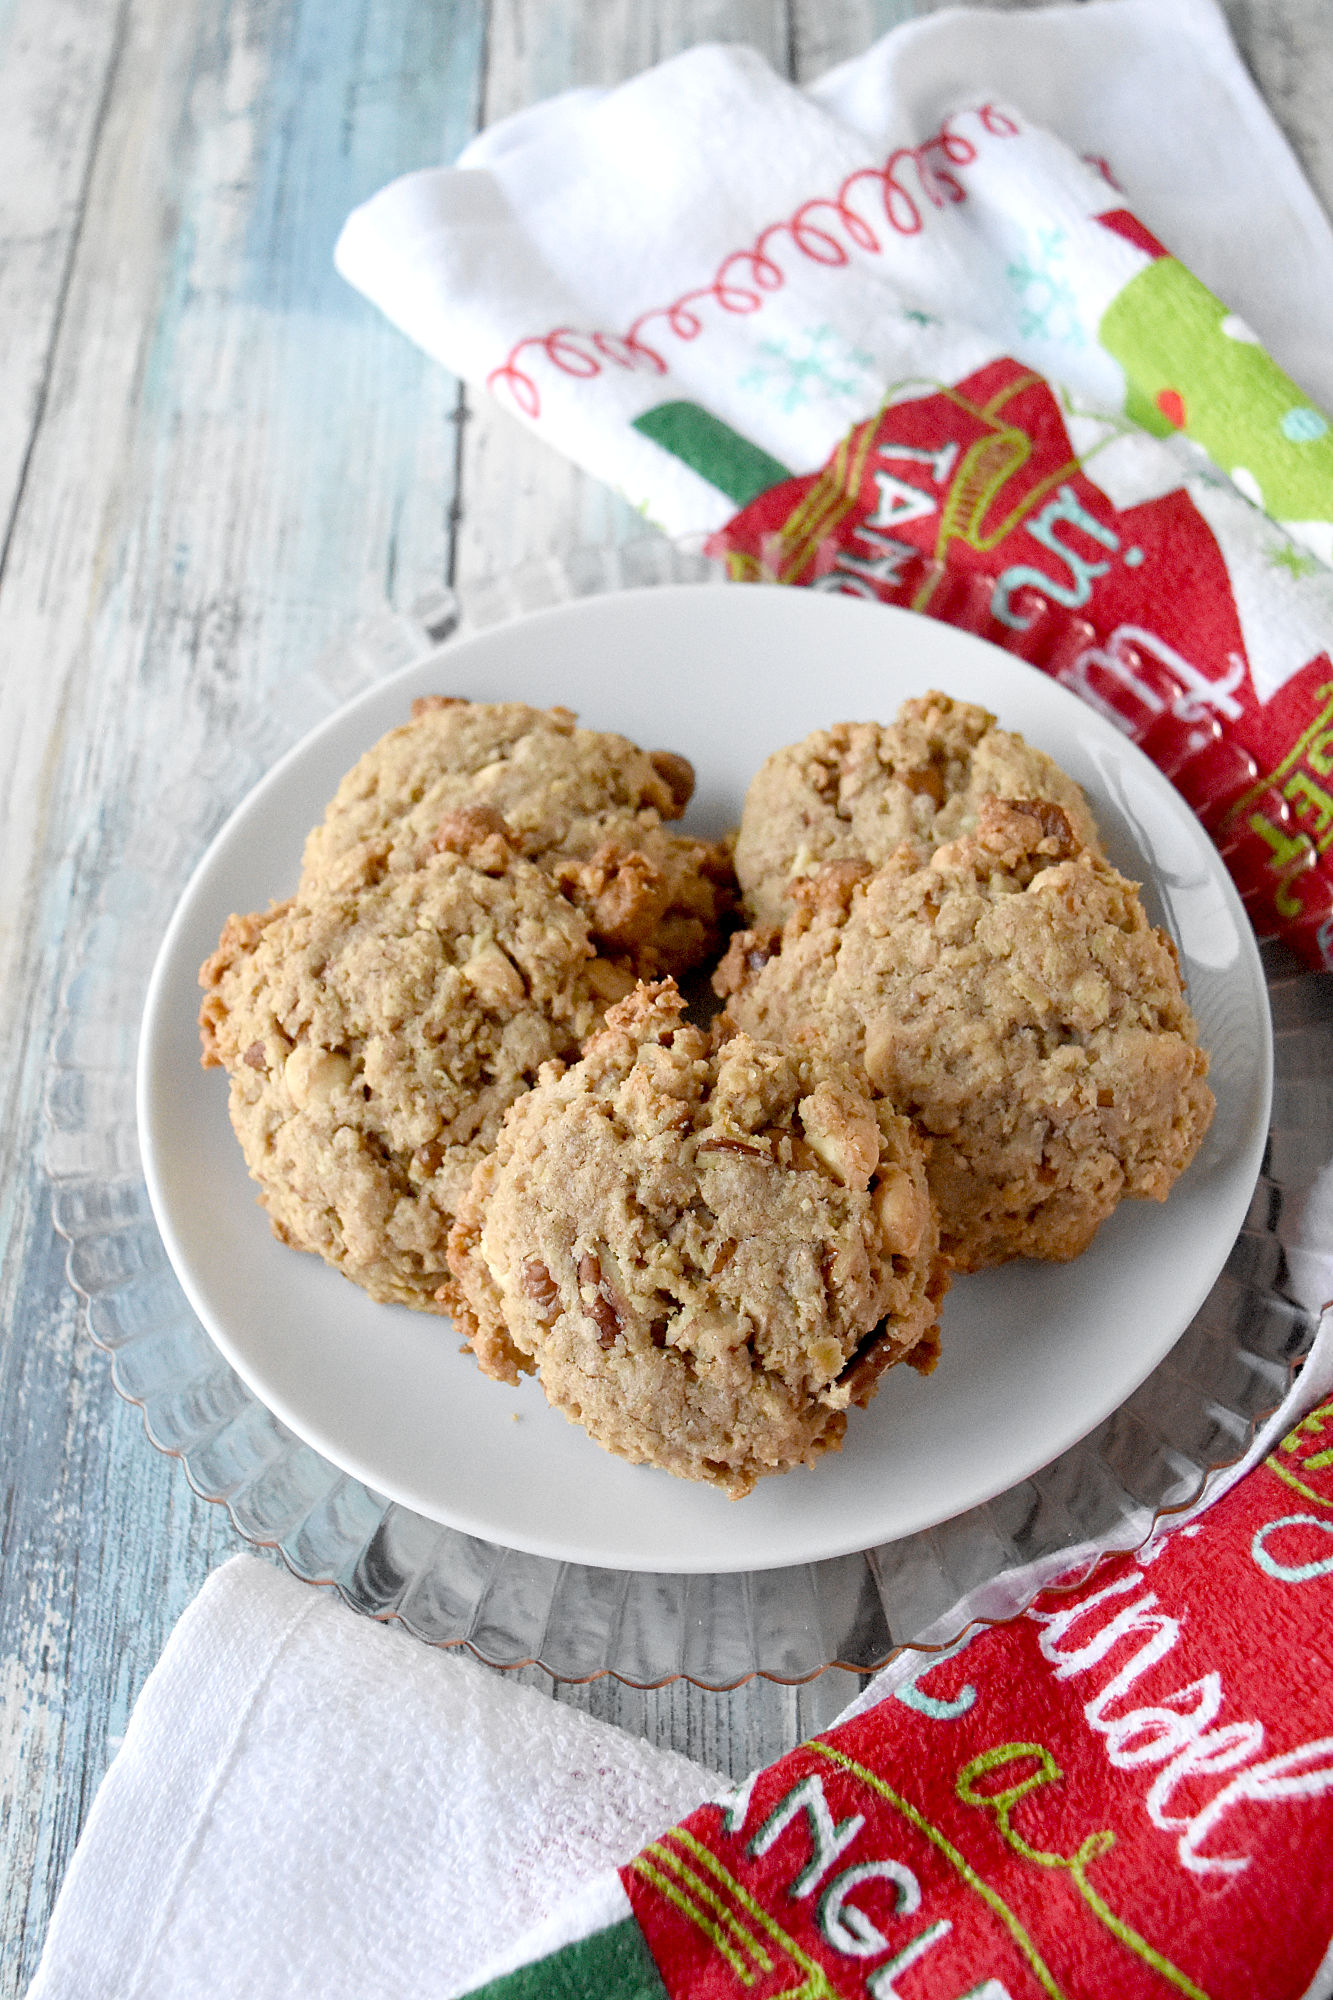 Oatmeal Pecan Cookies are slightly sweet with hearty oats, cinnamon, and crunchy pecans. They’re chewy and crunchy delicious. #ChristmasCookiesWeek